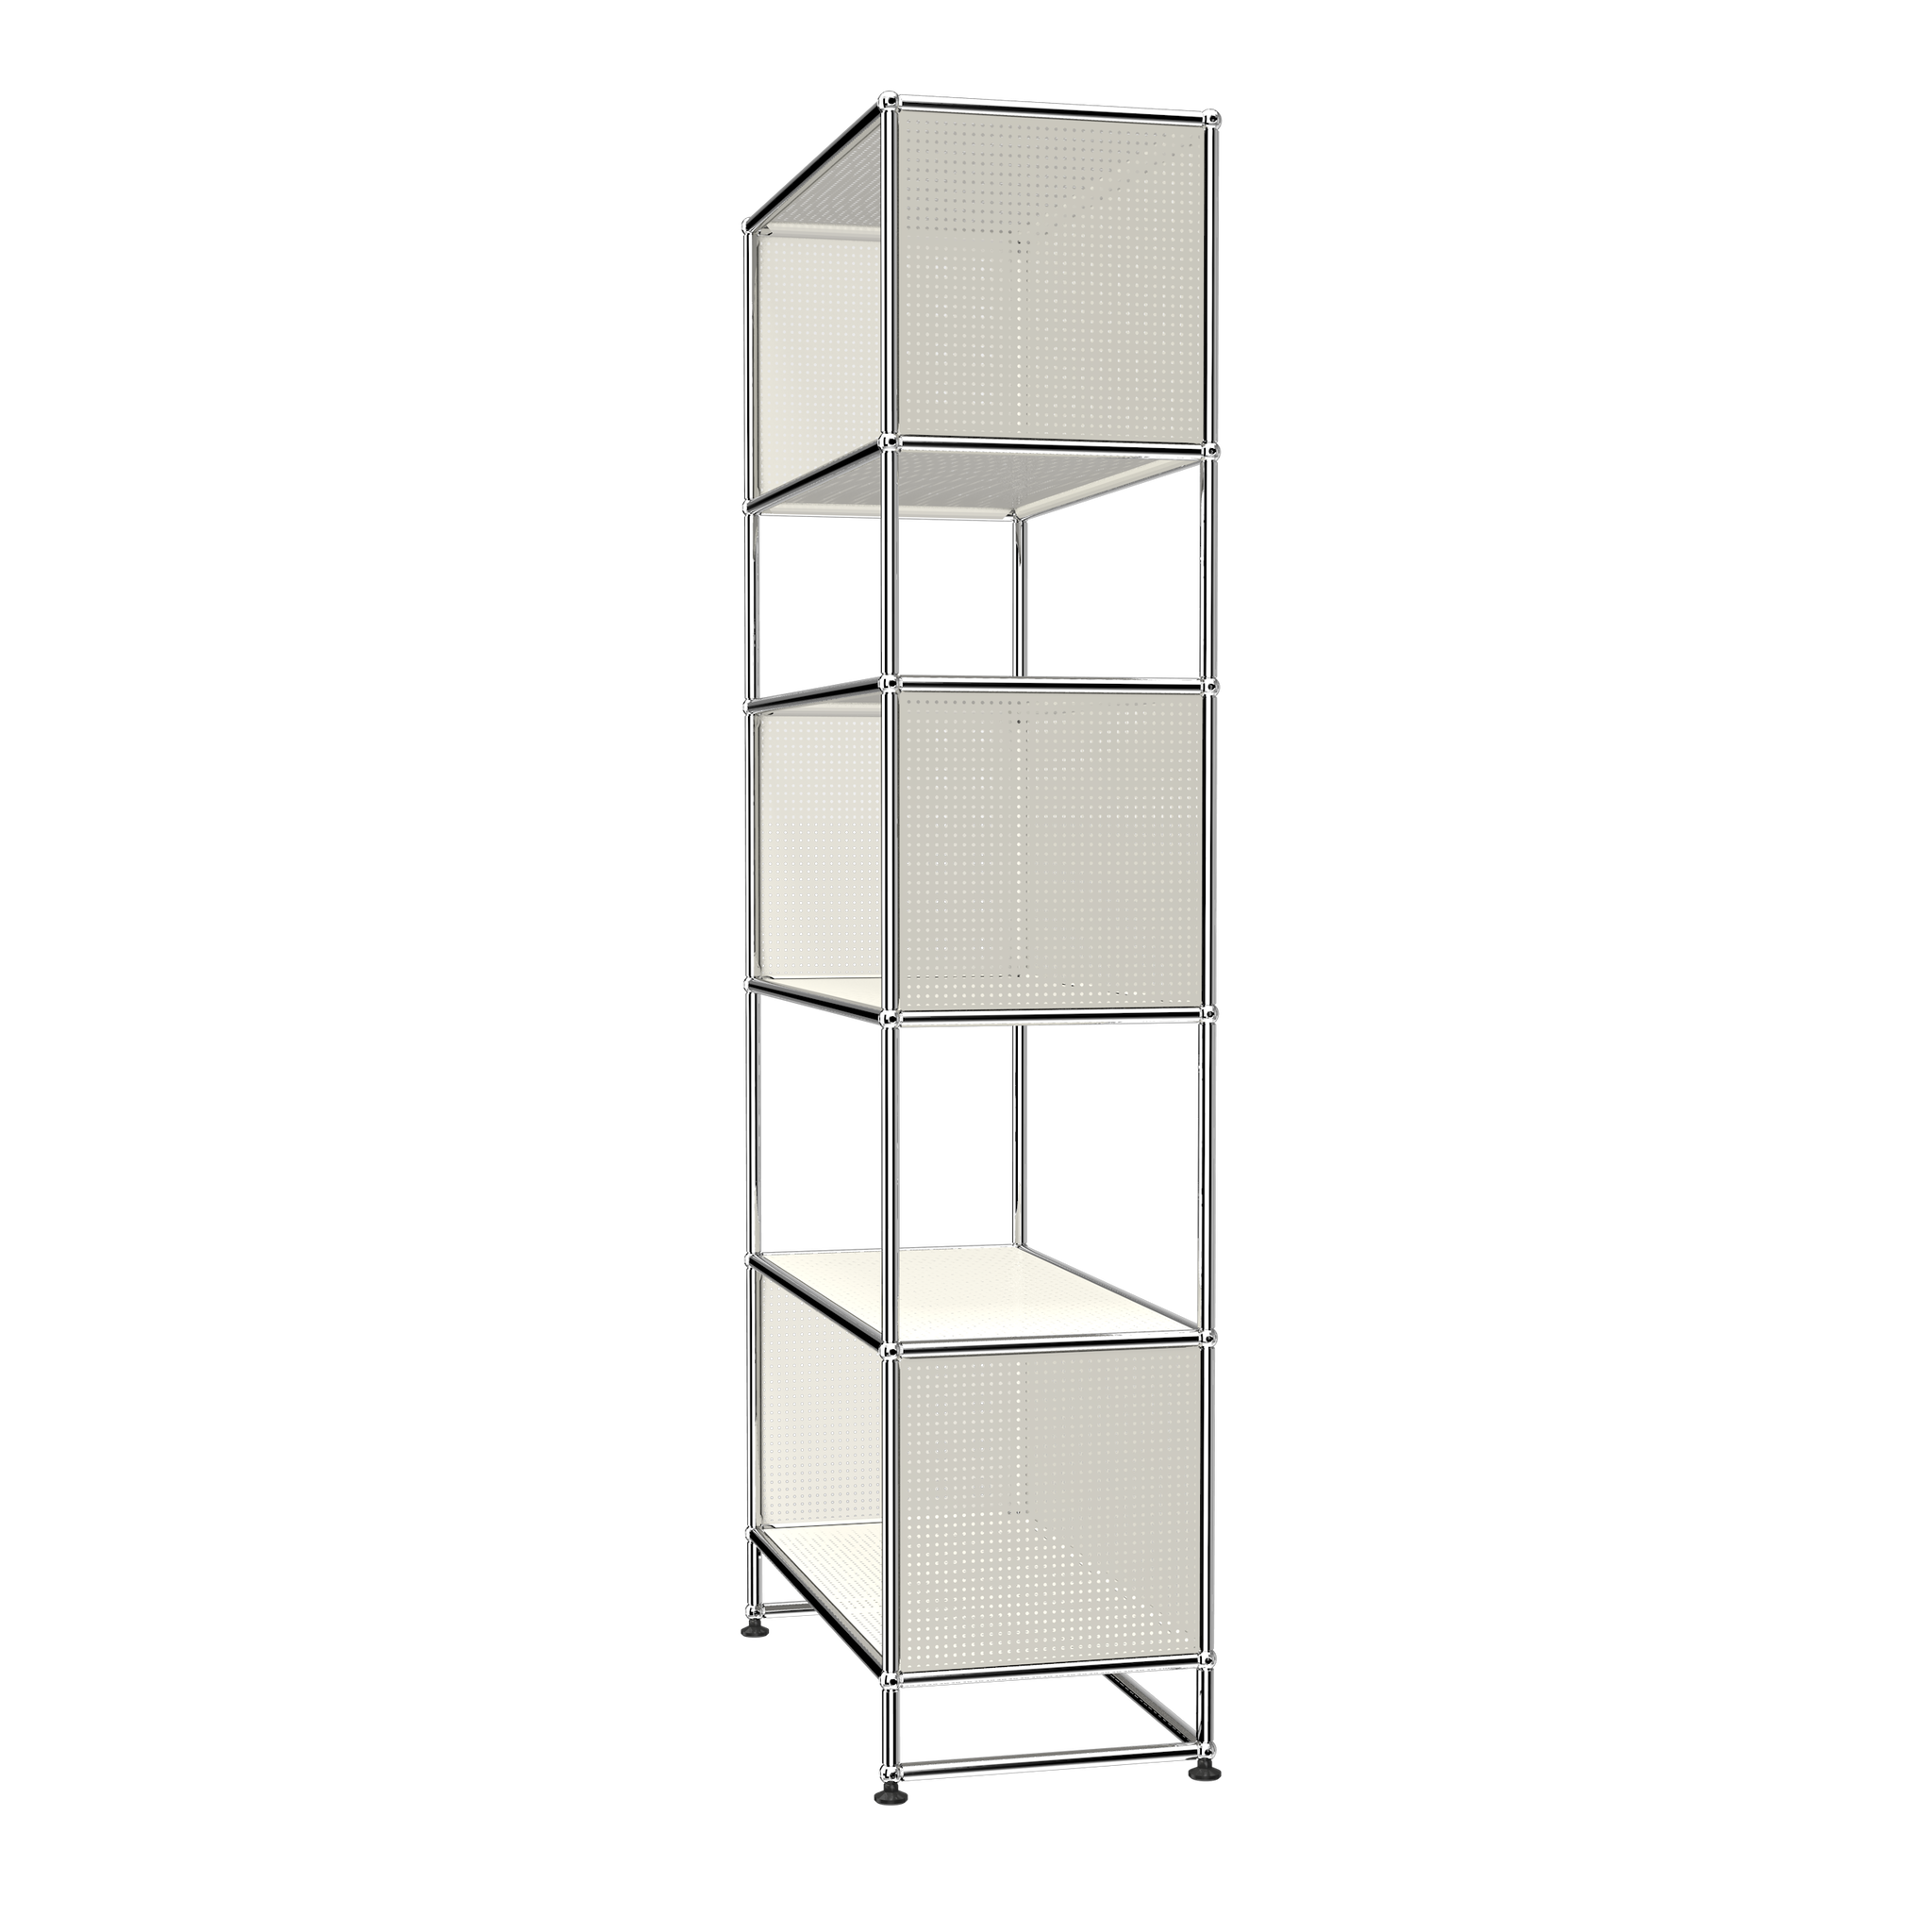 USM Haller 3 Box Shelving with Perforated Panels (RE119) Side View